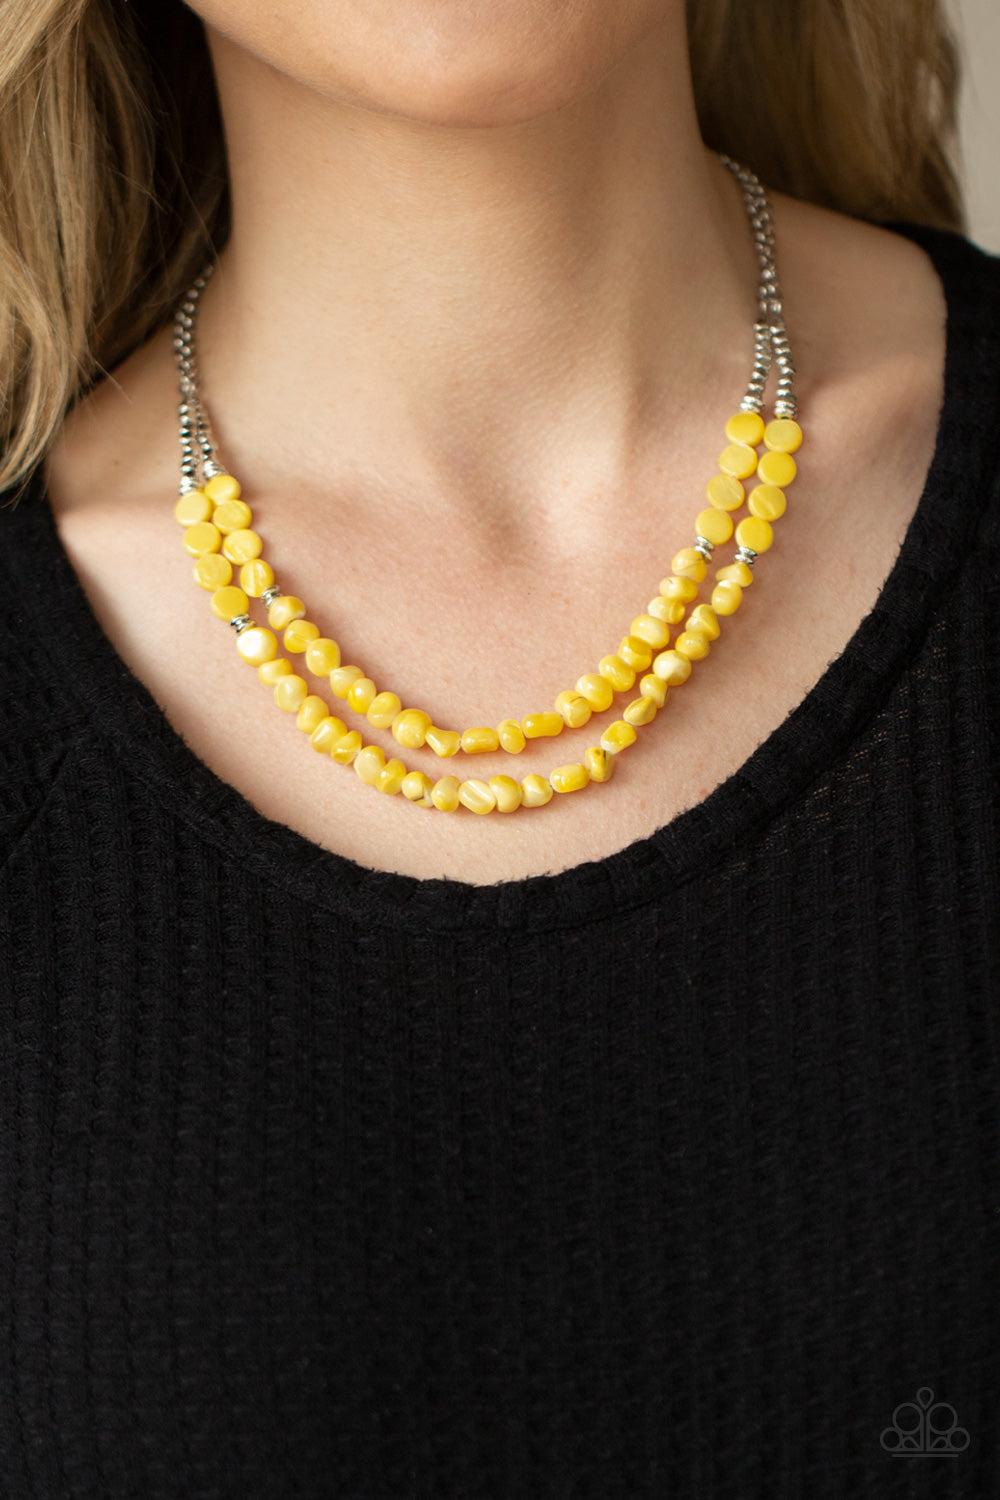 Paparazzi Necklaces - Staycation Status - Yellow